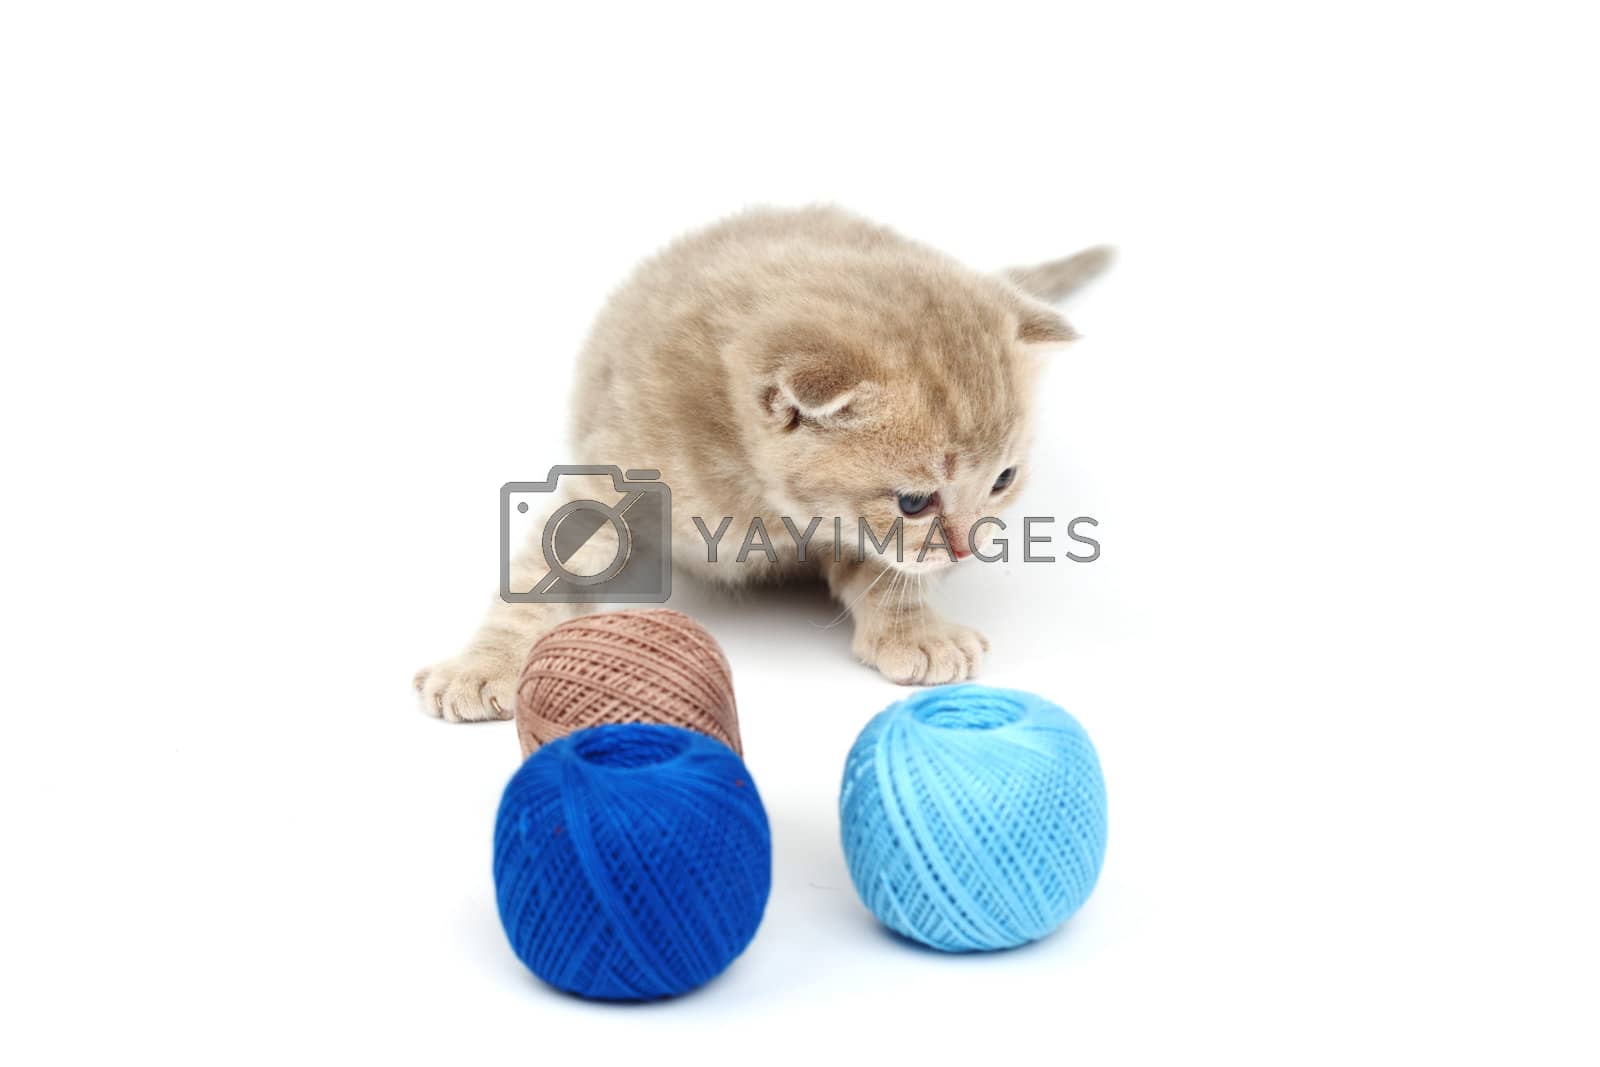 Royalty free image of cat and blue wool ball by Yellowj